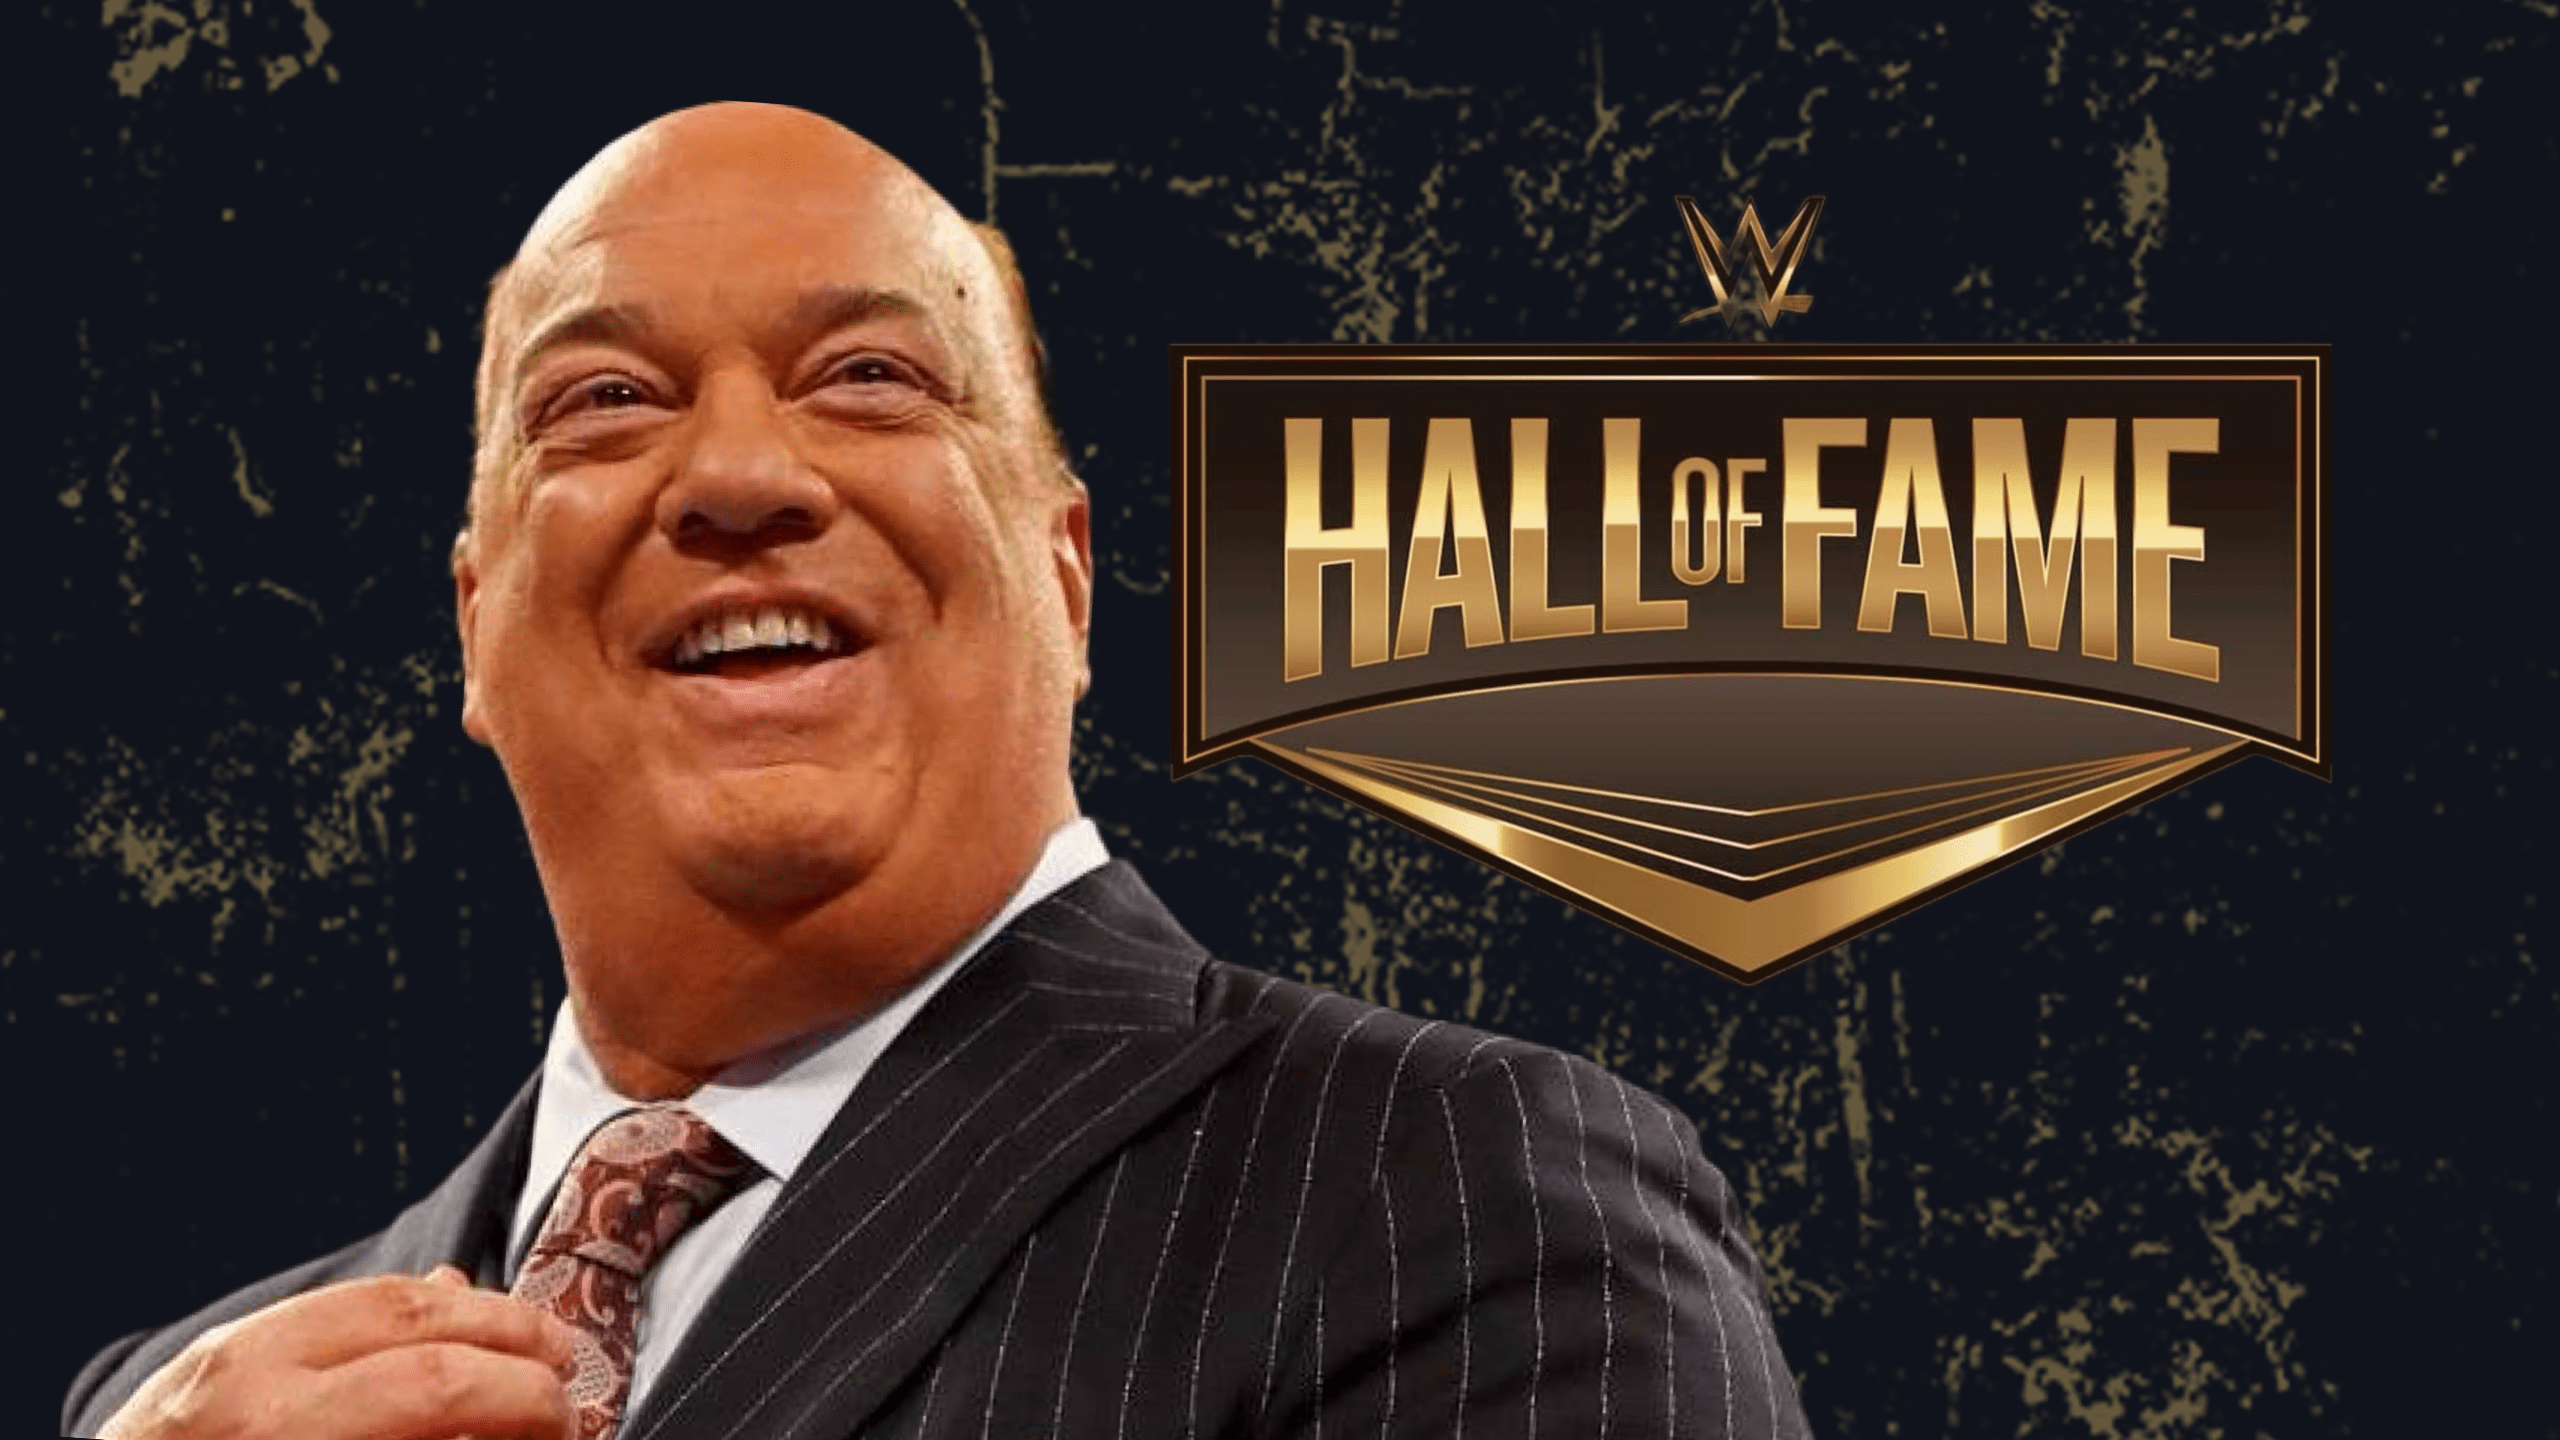 Paul Heyman’s WWE Hall of Fame Inductor and the Inductor for The Rock’s Grandmother Unveiled